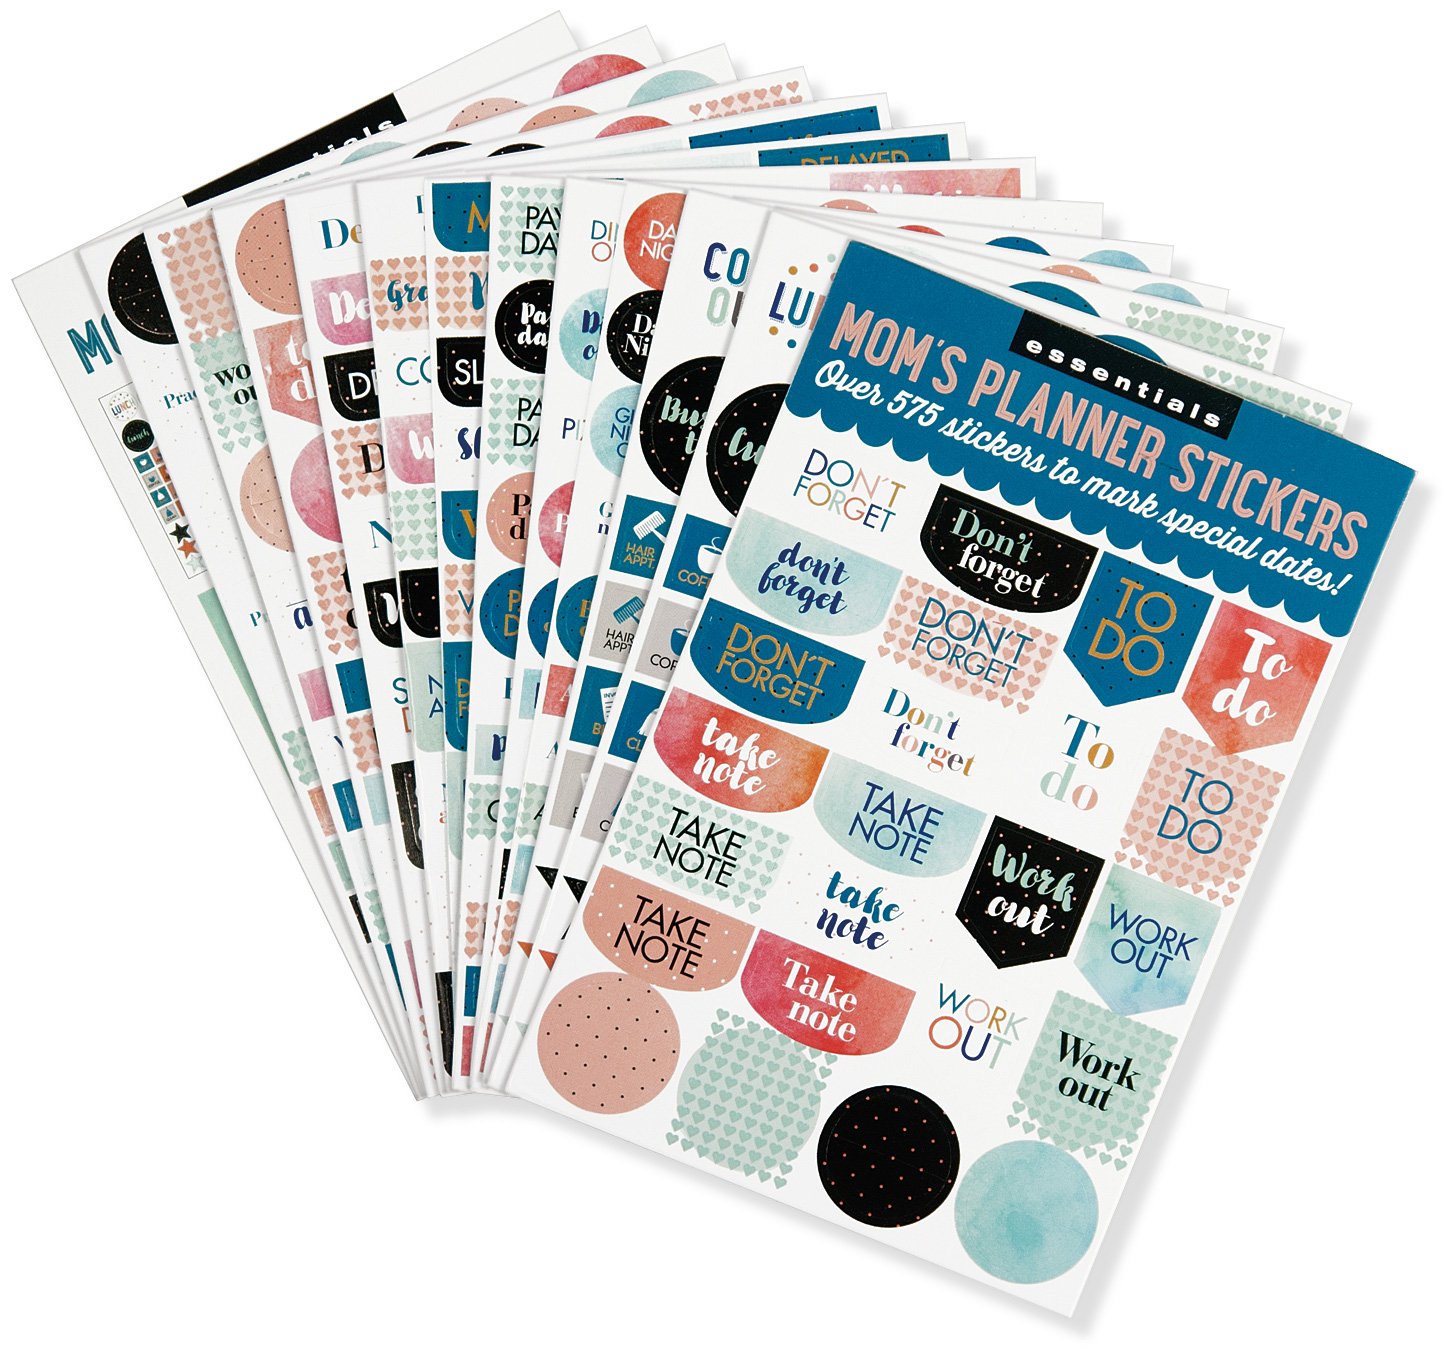 ZAMSI 1800+ Stickers for Planner 32 Sheets To Improve Your Planner ​and  Calendar